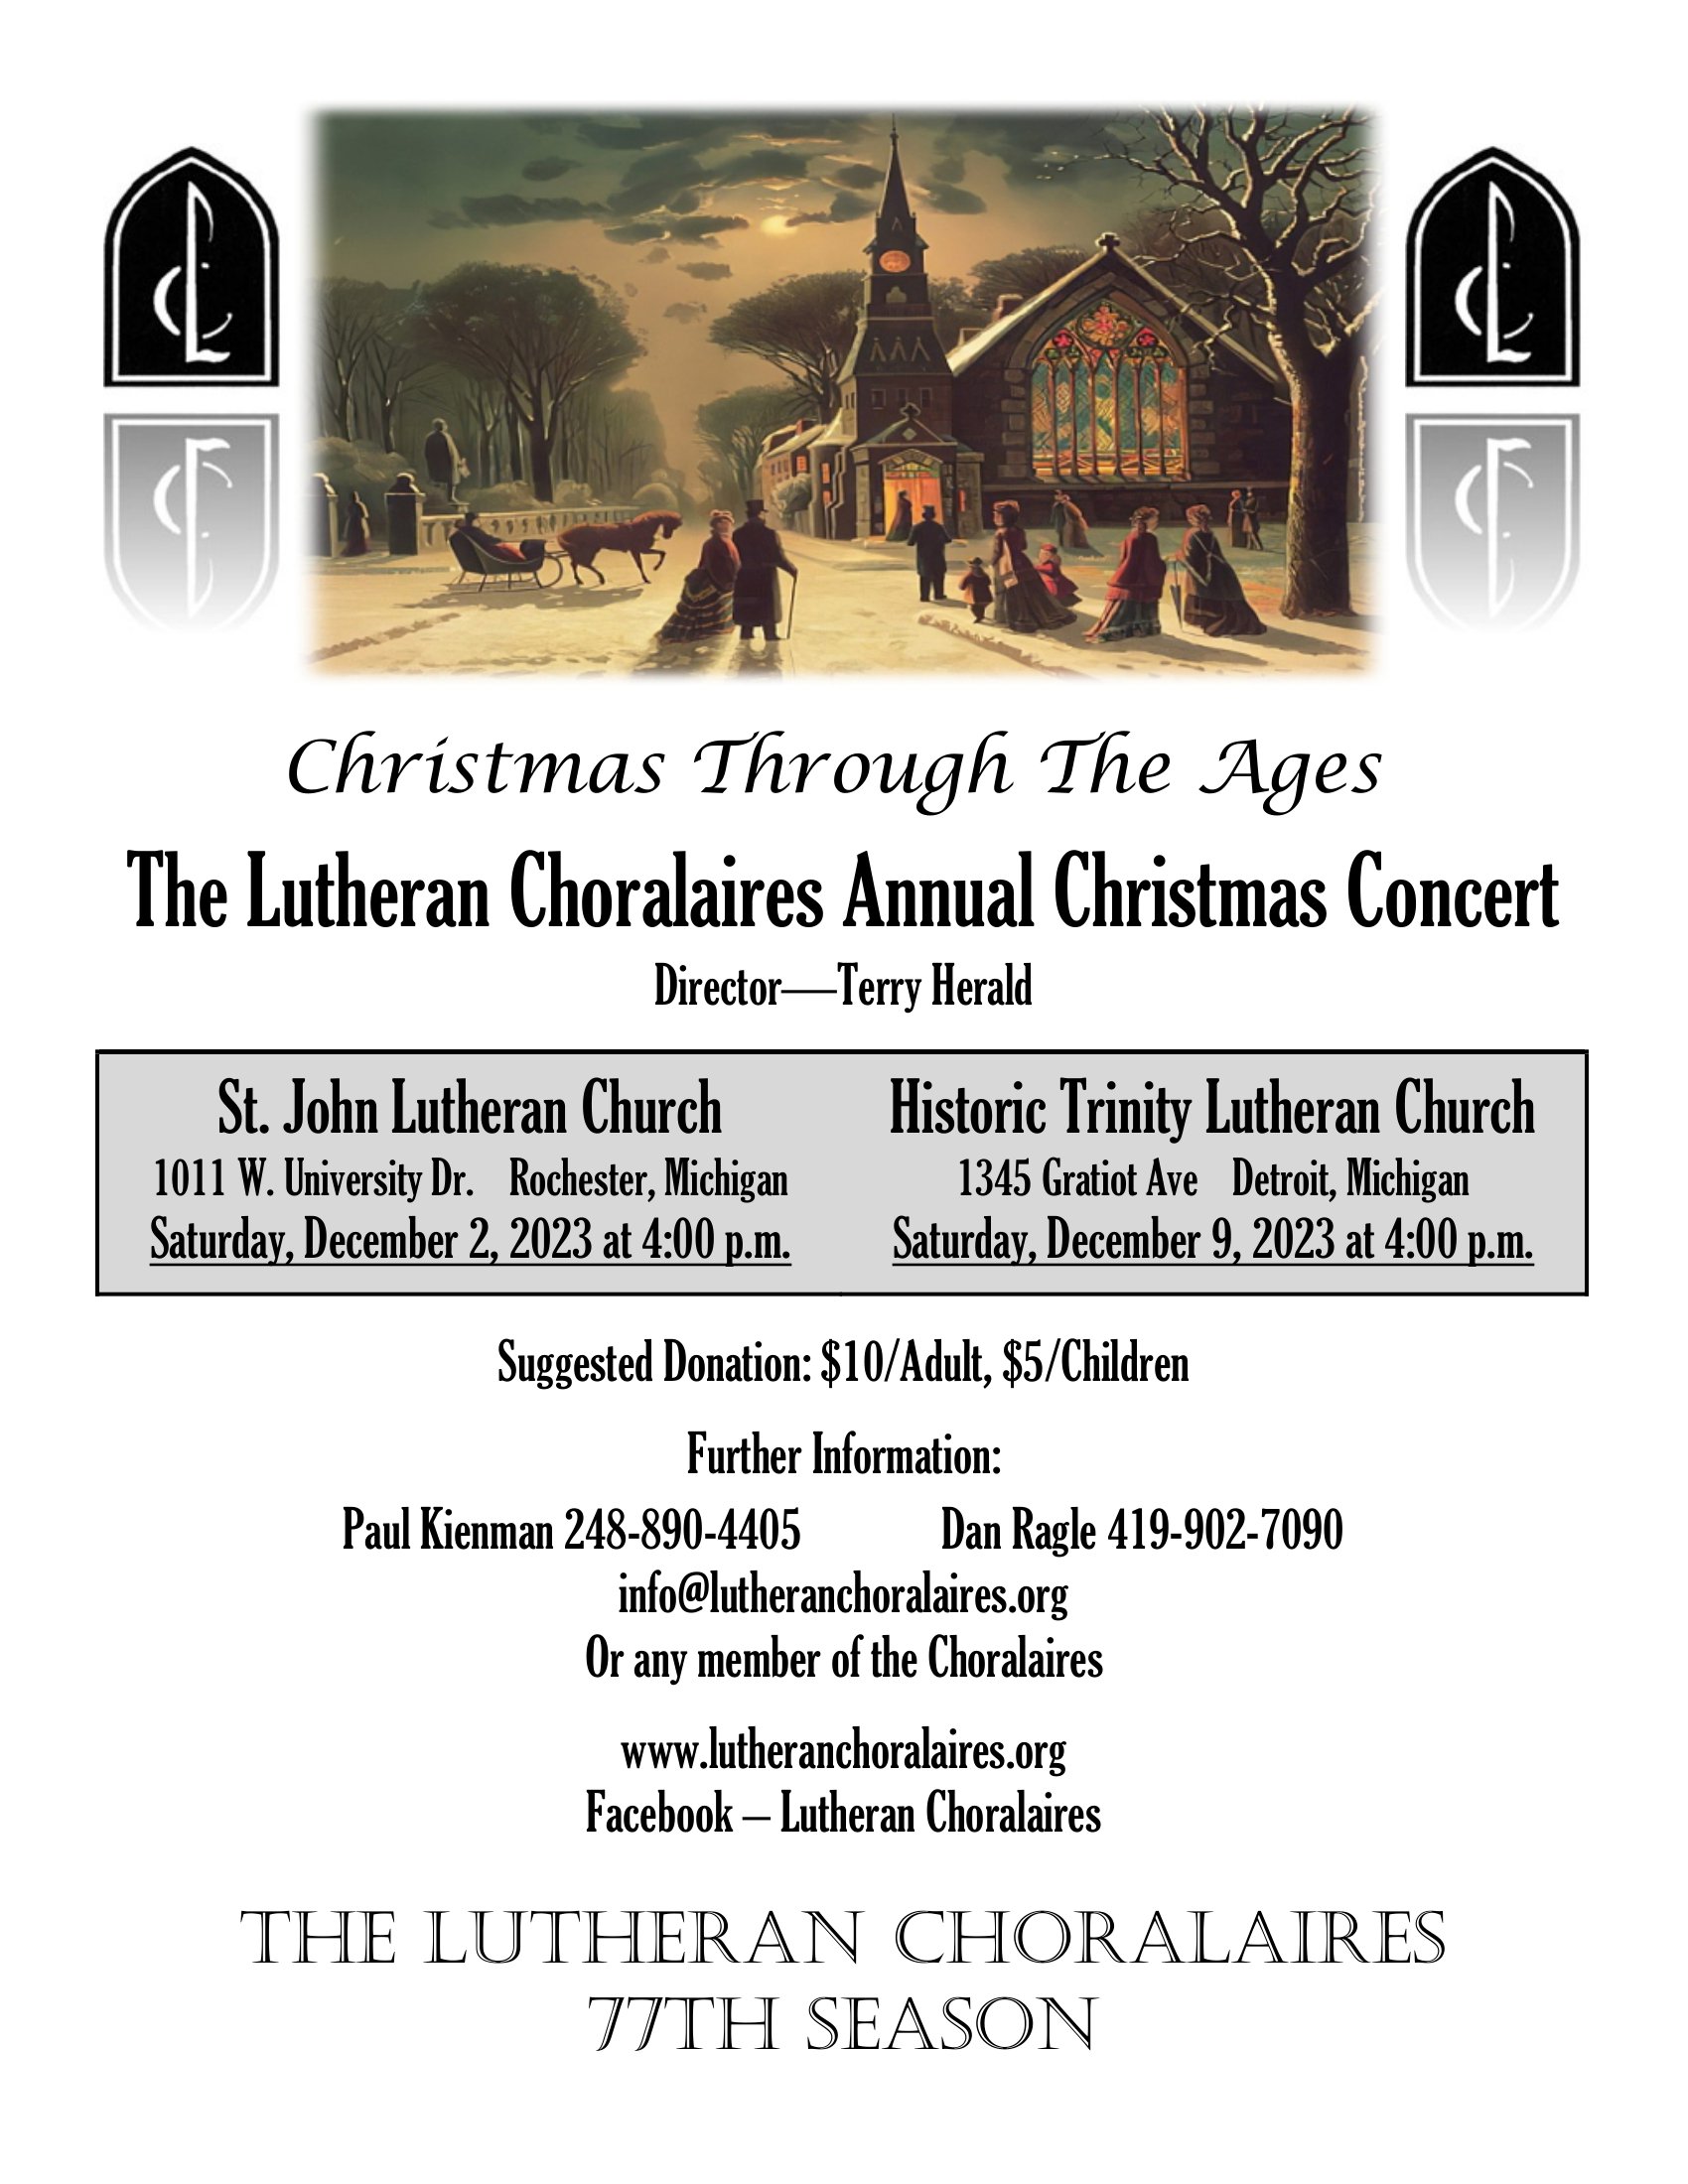 Lutheran Choralaires Christmas 2023 Flyer